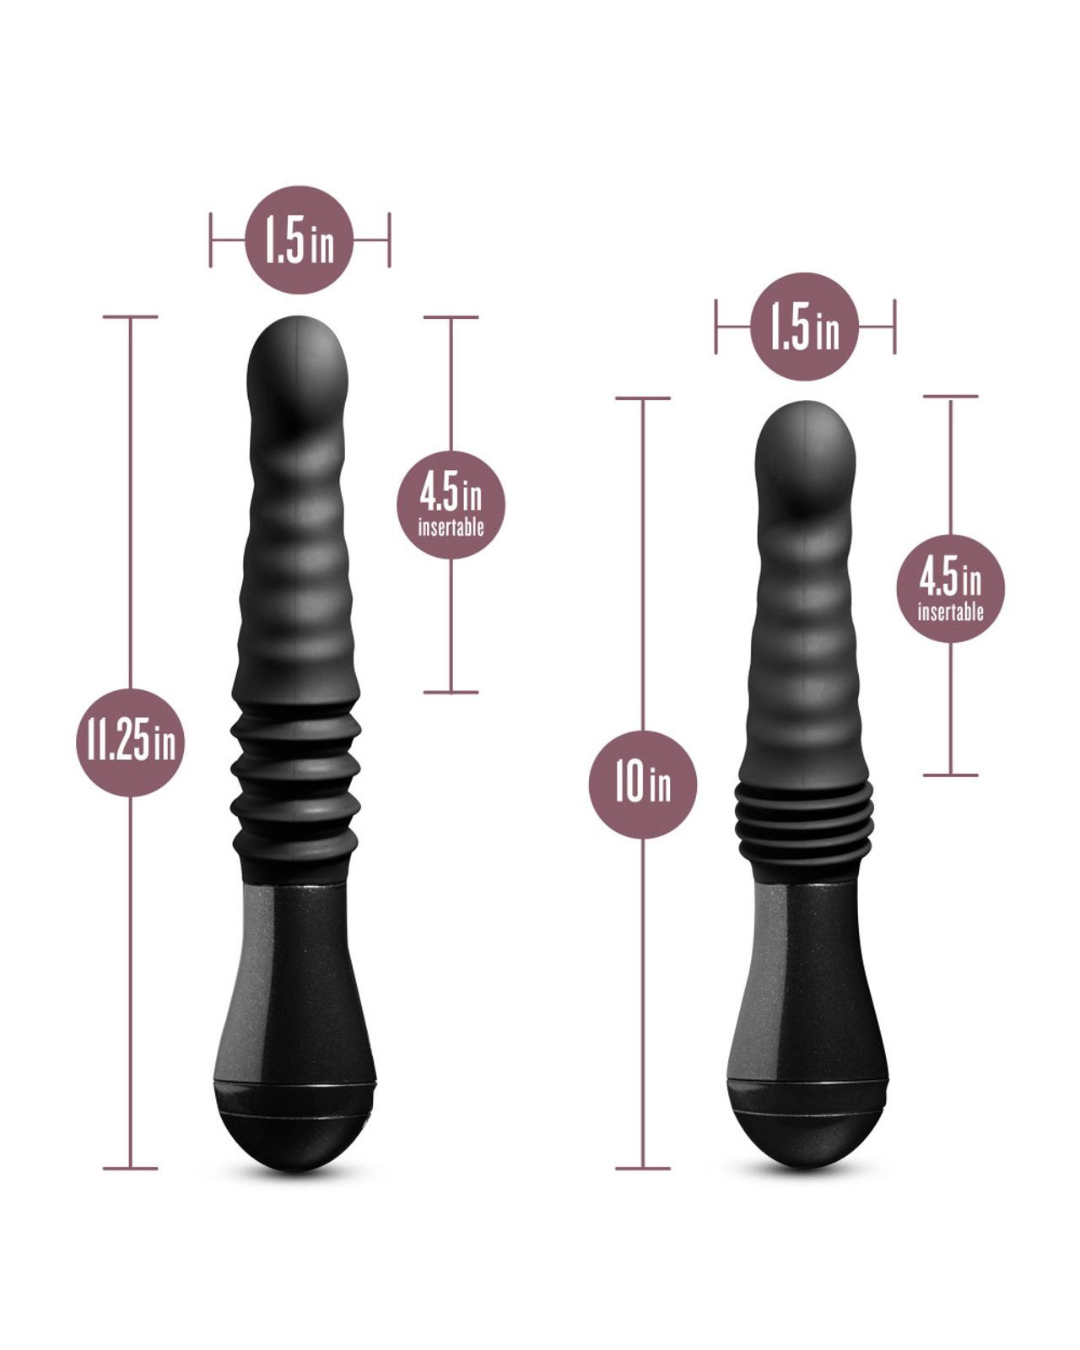 Lazarus Thrusting G-Spot and Prostate 10 Inch Dildo fully extended and normal with different measurements on a white background